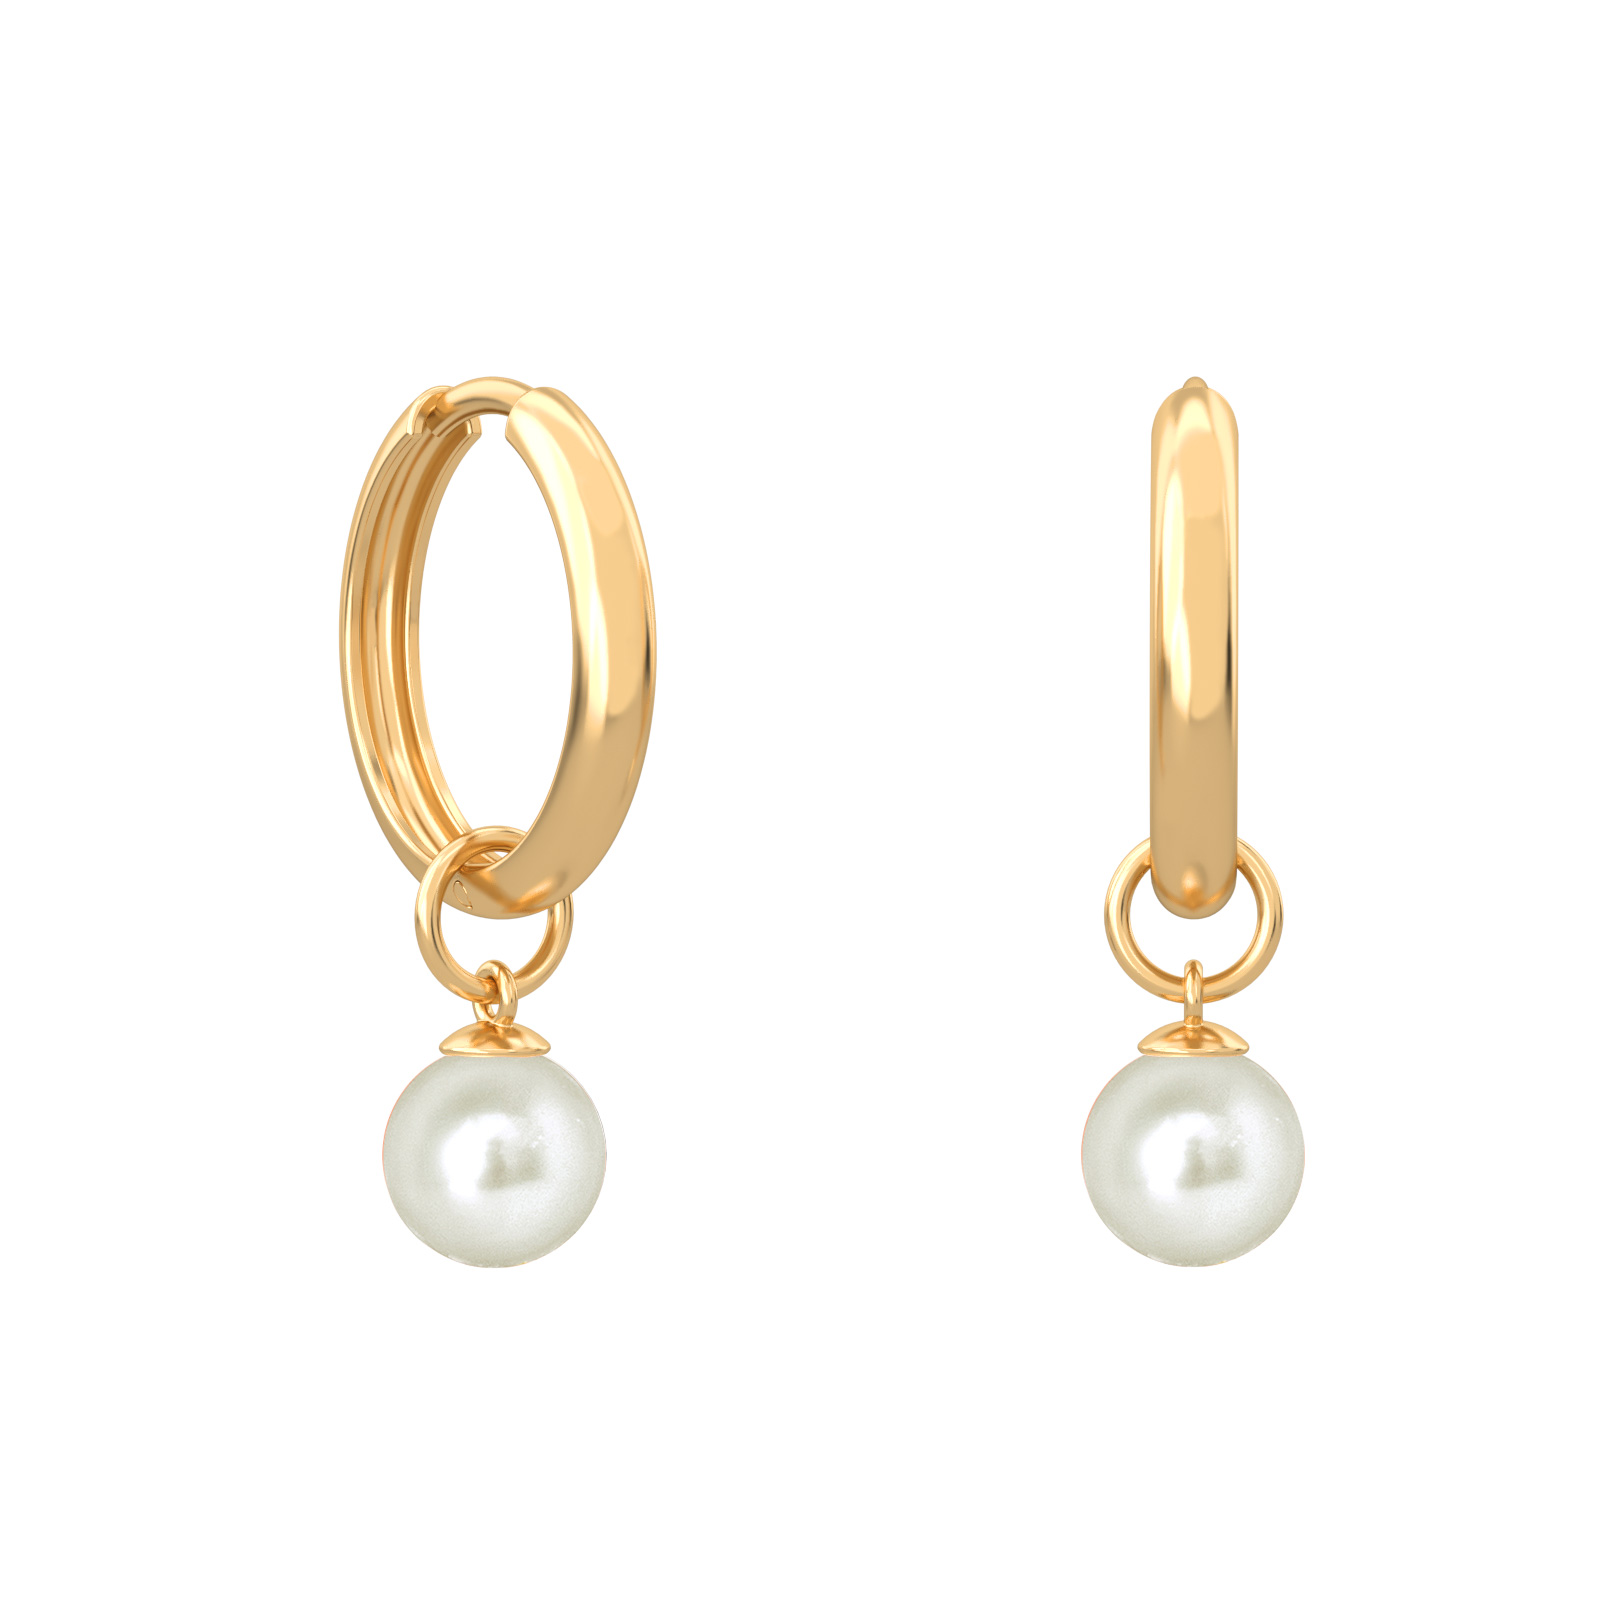 Why do inspirational women choose pearls?